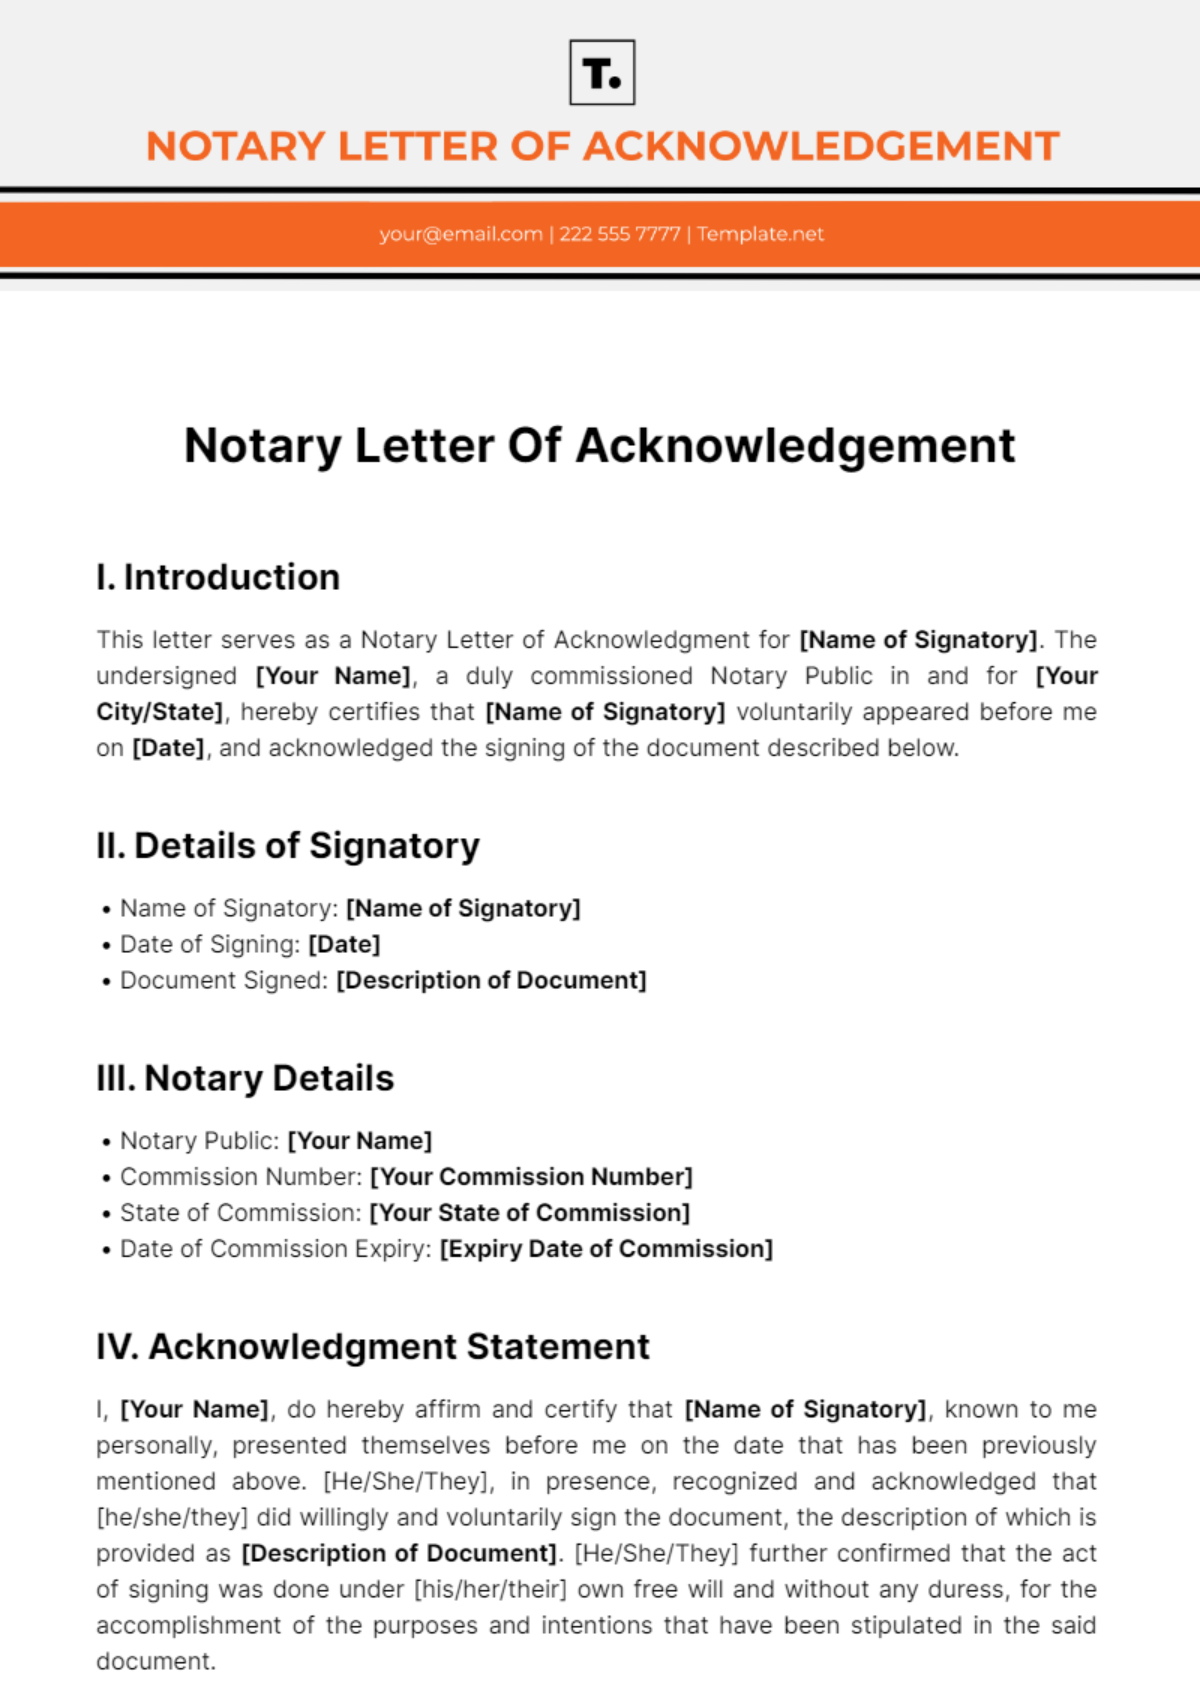 Free Notary Letter Of Acknowledgement Template